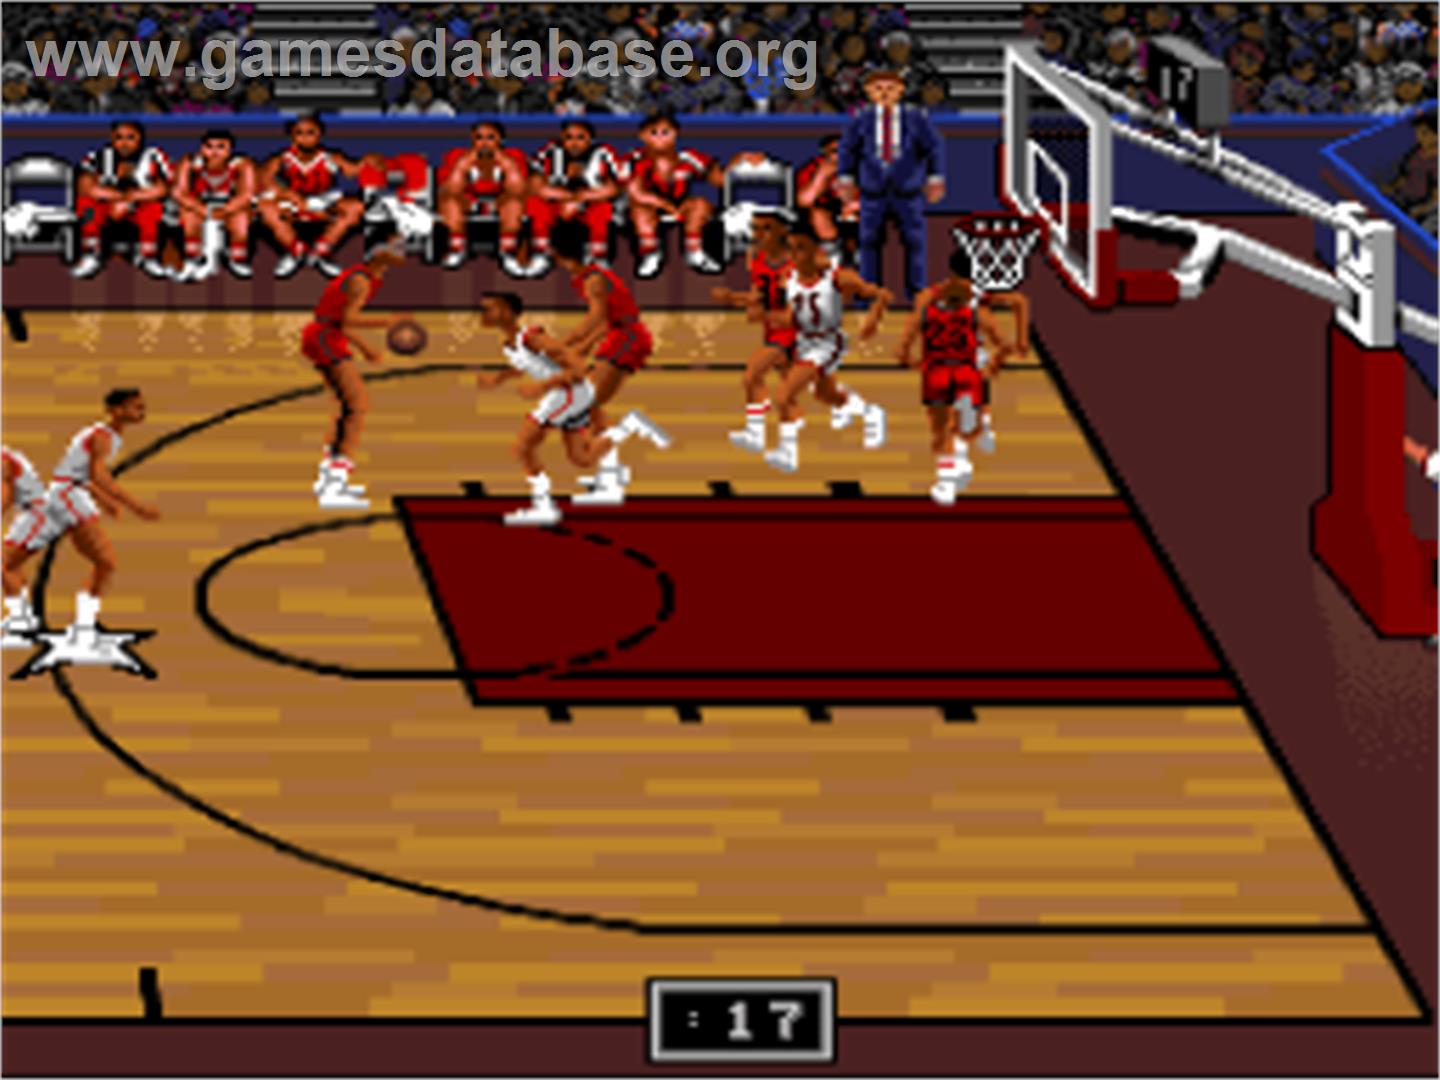 Bulls vs. Blazers and the NBA Playoffs - Nintendo SNES - Artwork - In Game